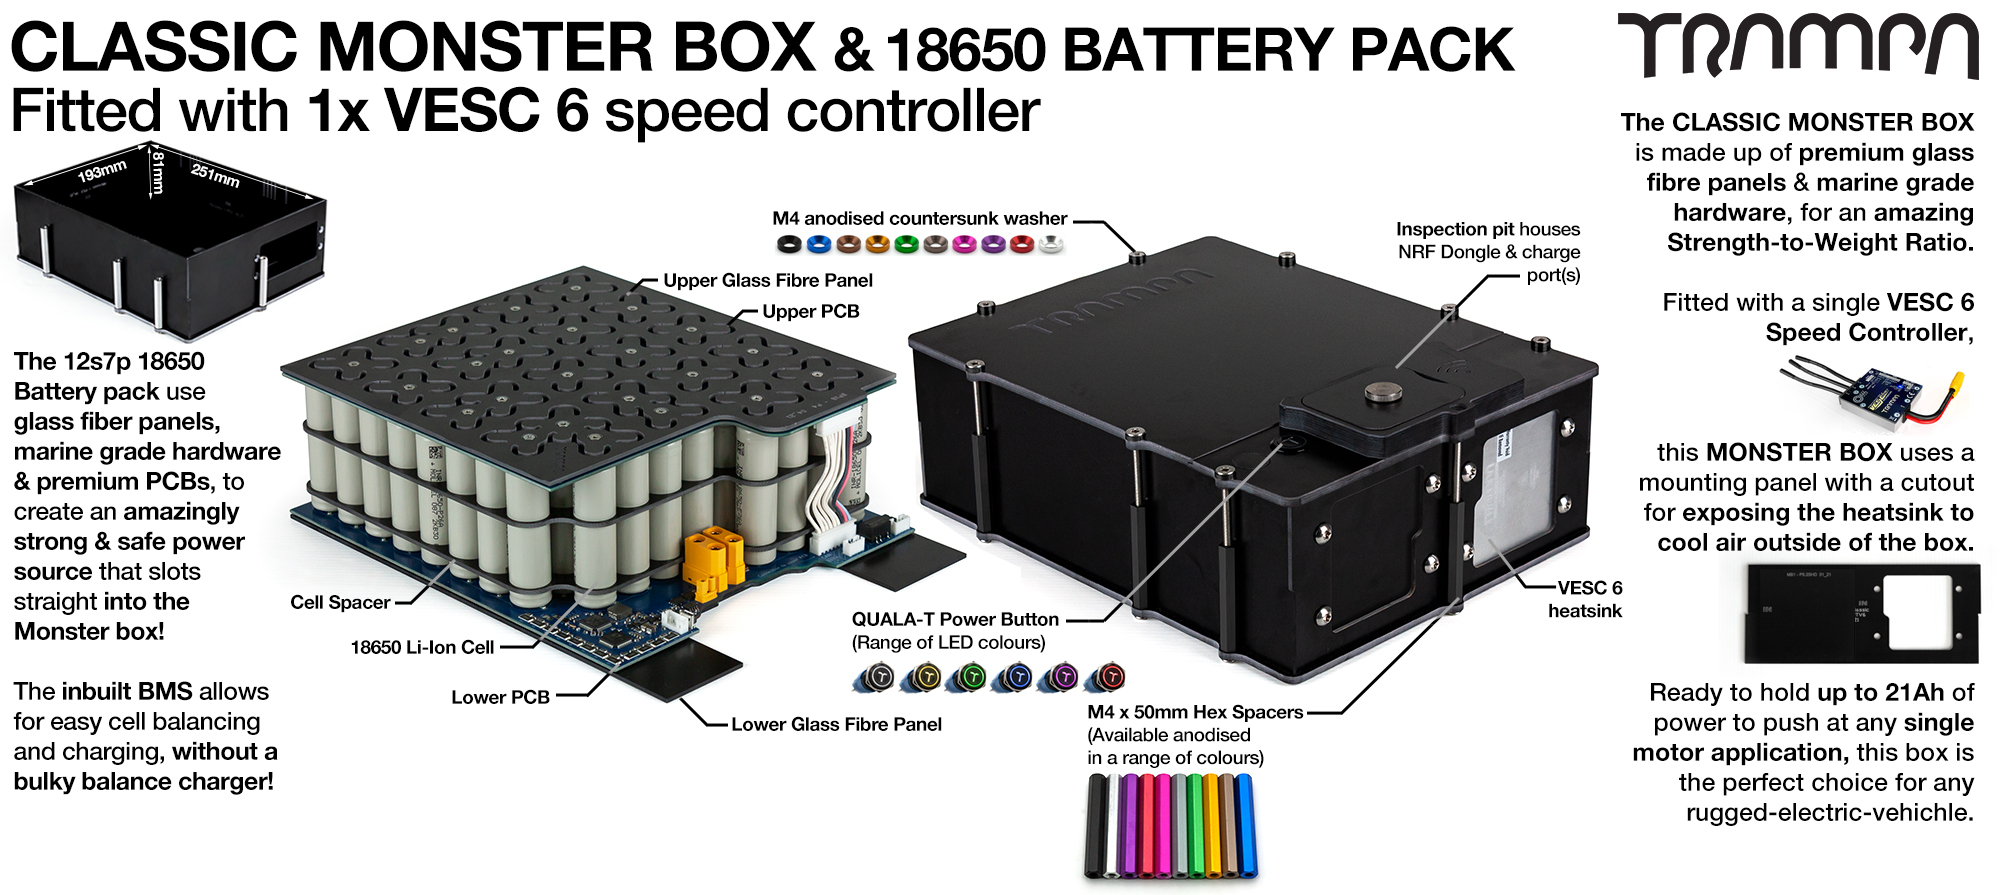 Classic MONSTER Box MkV - with 18650 PCB Pack, 1x VESC 6 with NRF & 84x 18650 cells 12s7p 21Ah - PCB based Battery Pack with Integrated Battery Management System (BMS) - UK CUSTOMERS ONLY